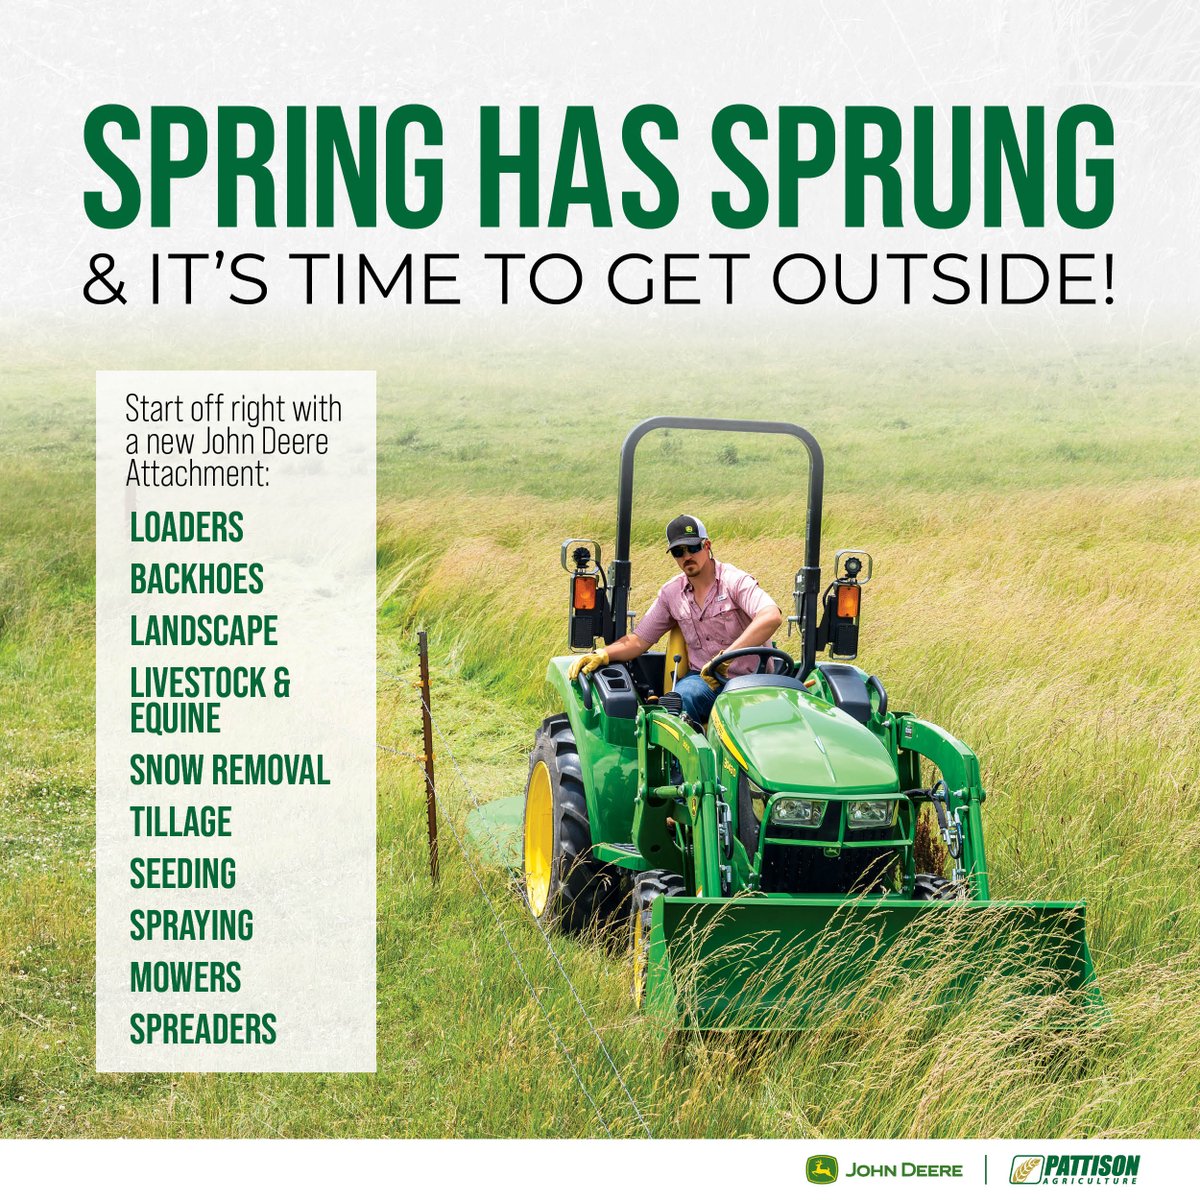 Spring has Sprung! 🌷 It's time to get outside! Start off right with a new John Deere Attachment! Shop Now: ow.ly/v3A650RlFIq #PattisonAg